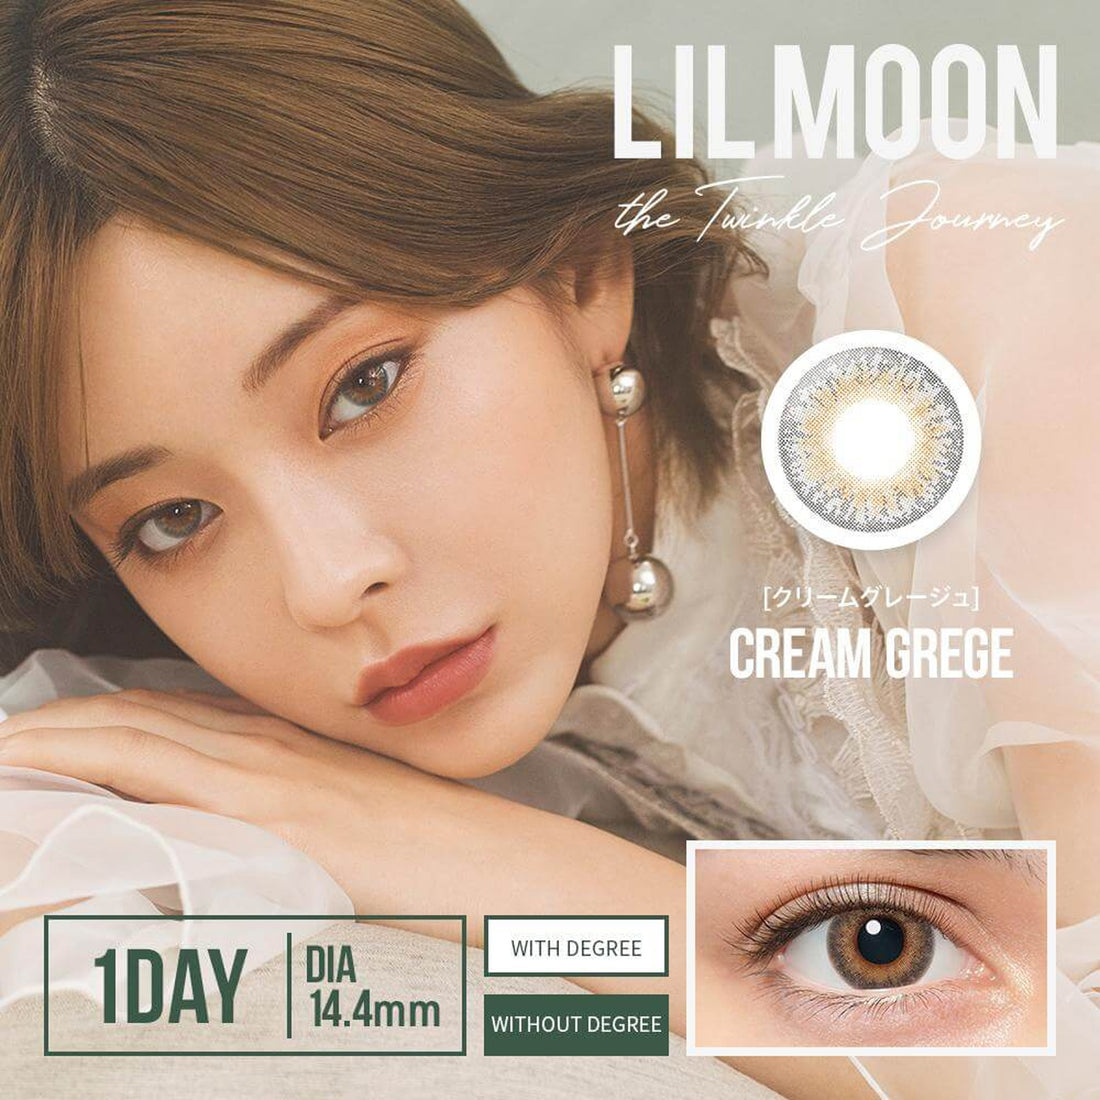 LIL MOON 1Day Contact Lenses-Cream Grege 10pcs